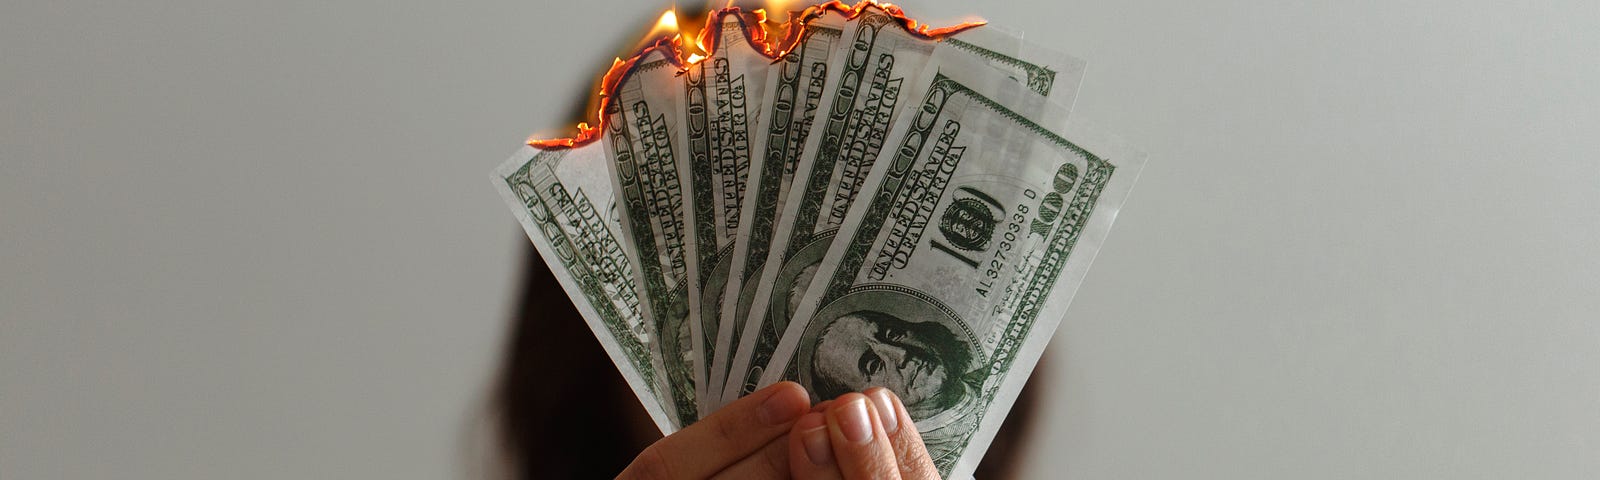 A woman holding a money that is burning on her hands altogether.